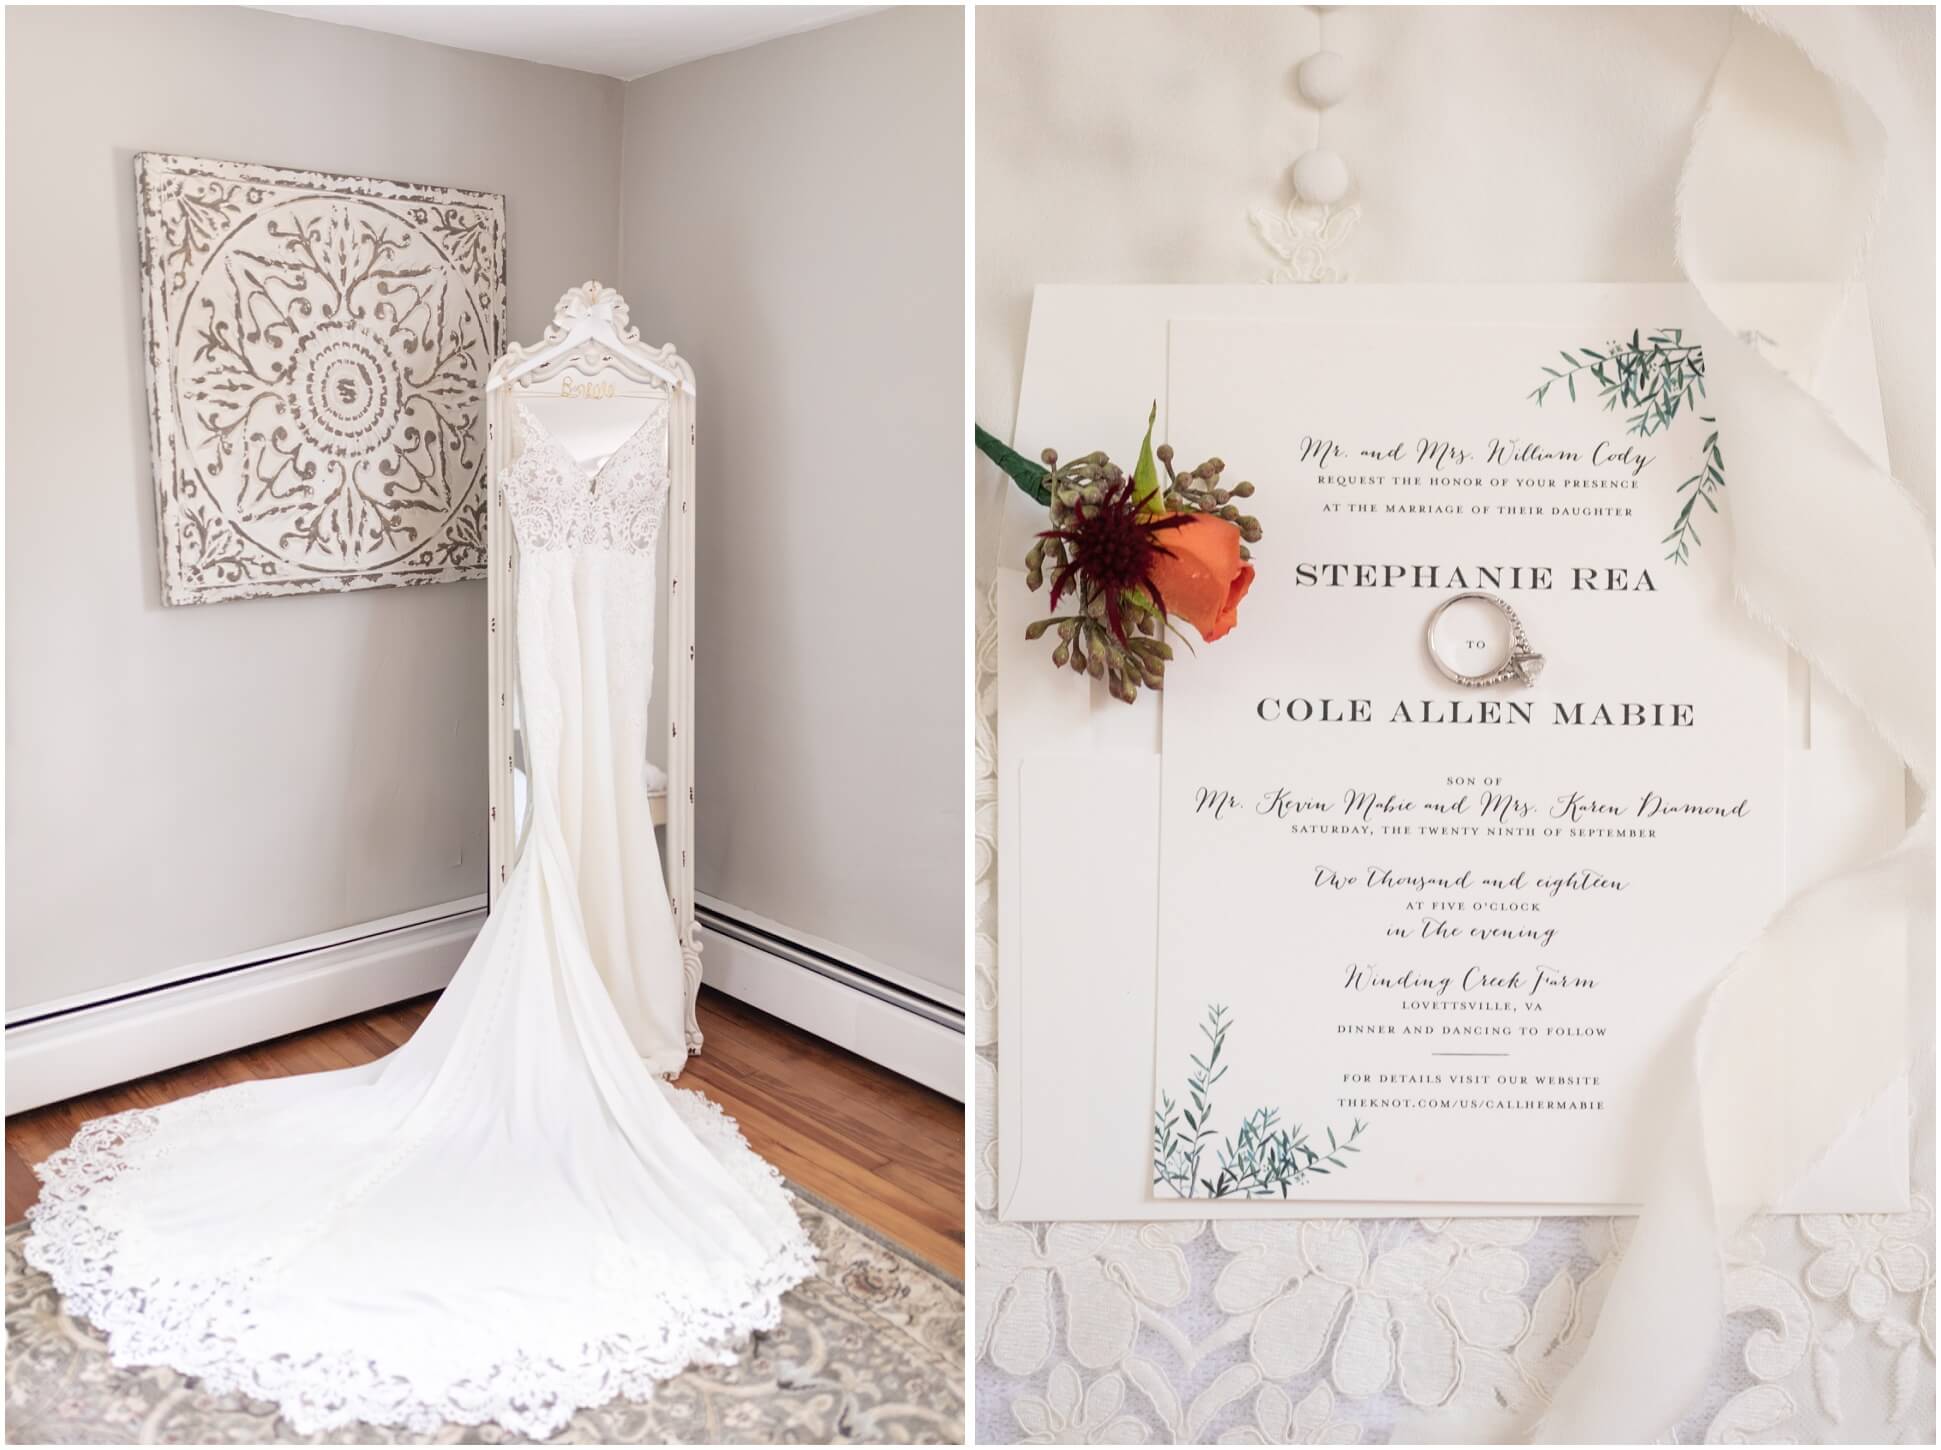 LEFT IMAGE: BRIDES WEDDING GOWN HANGING FROM MIRROR, RIGHT IMAGE: WEDDING INVITATION FLAT LAY